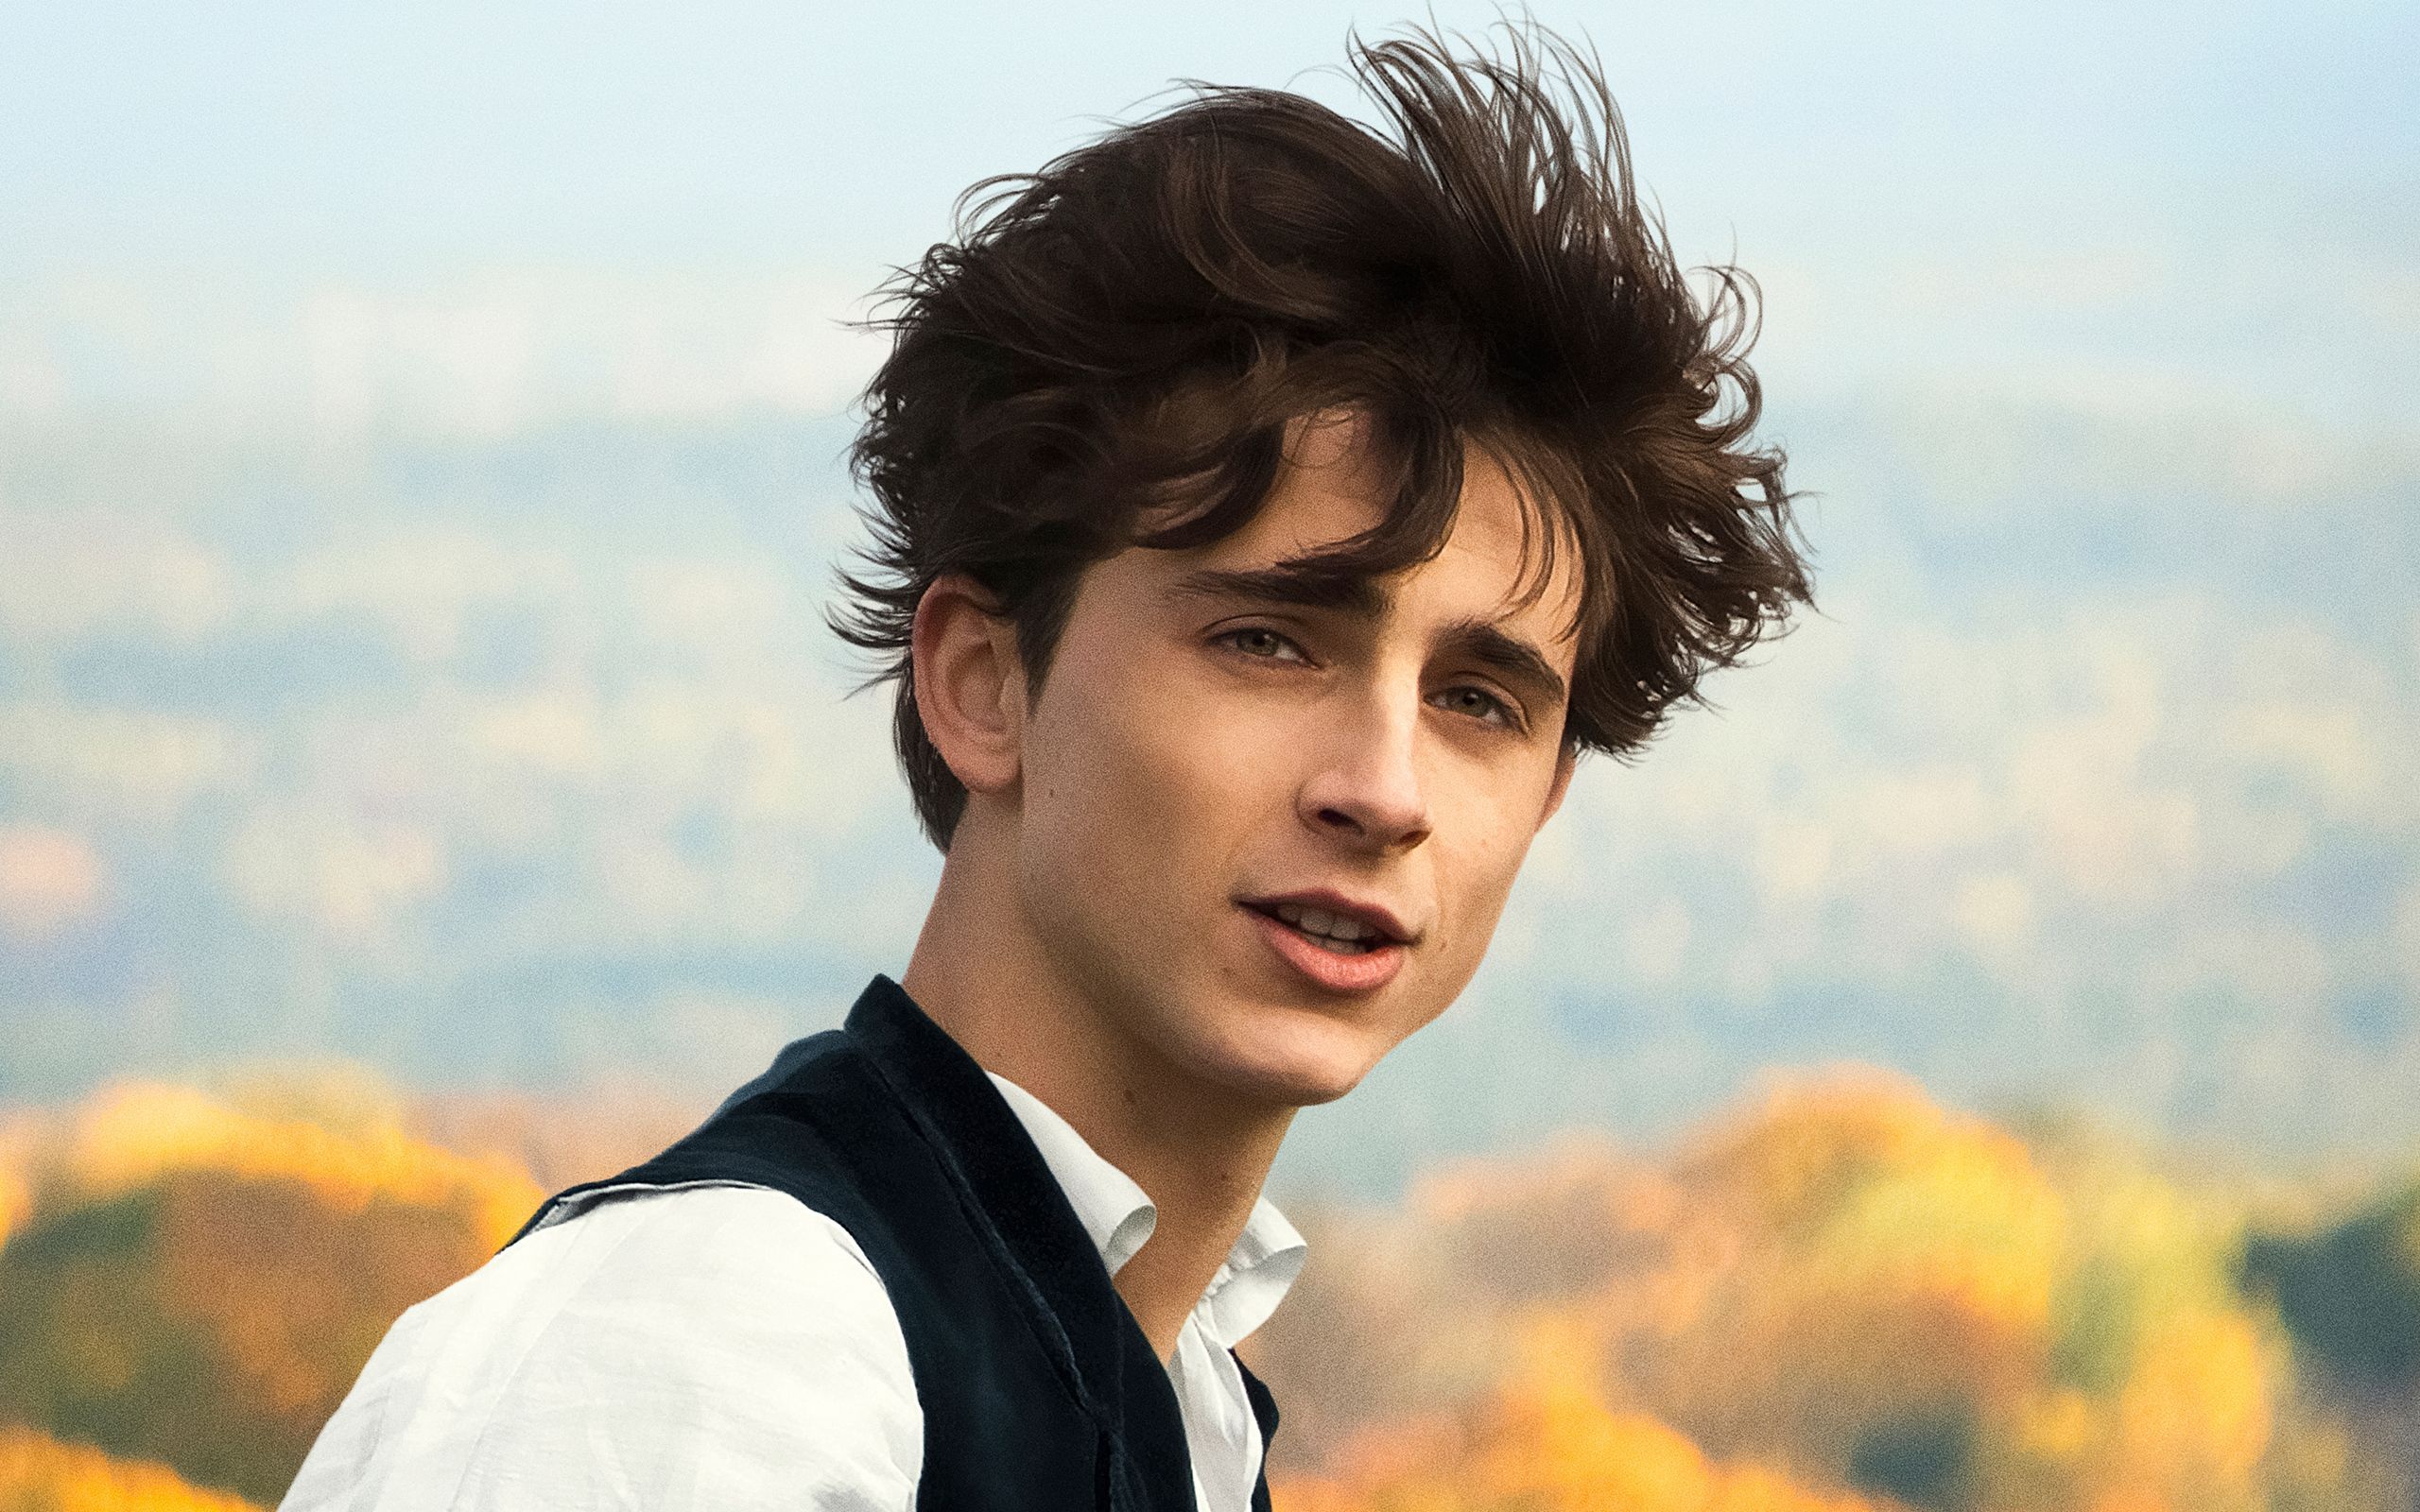 A young man with curly hair and vest - Timothee Chalamet